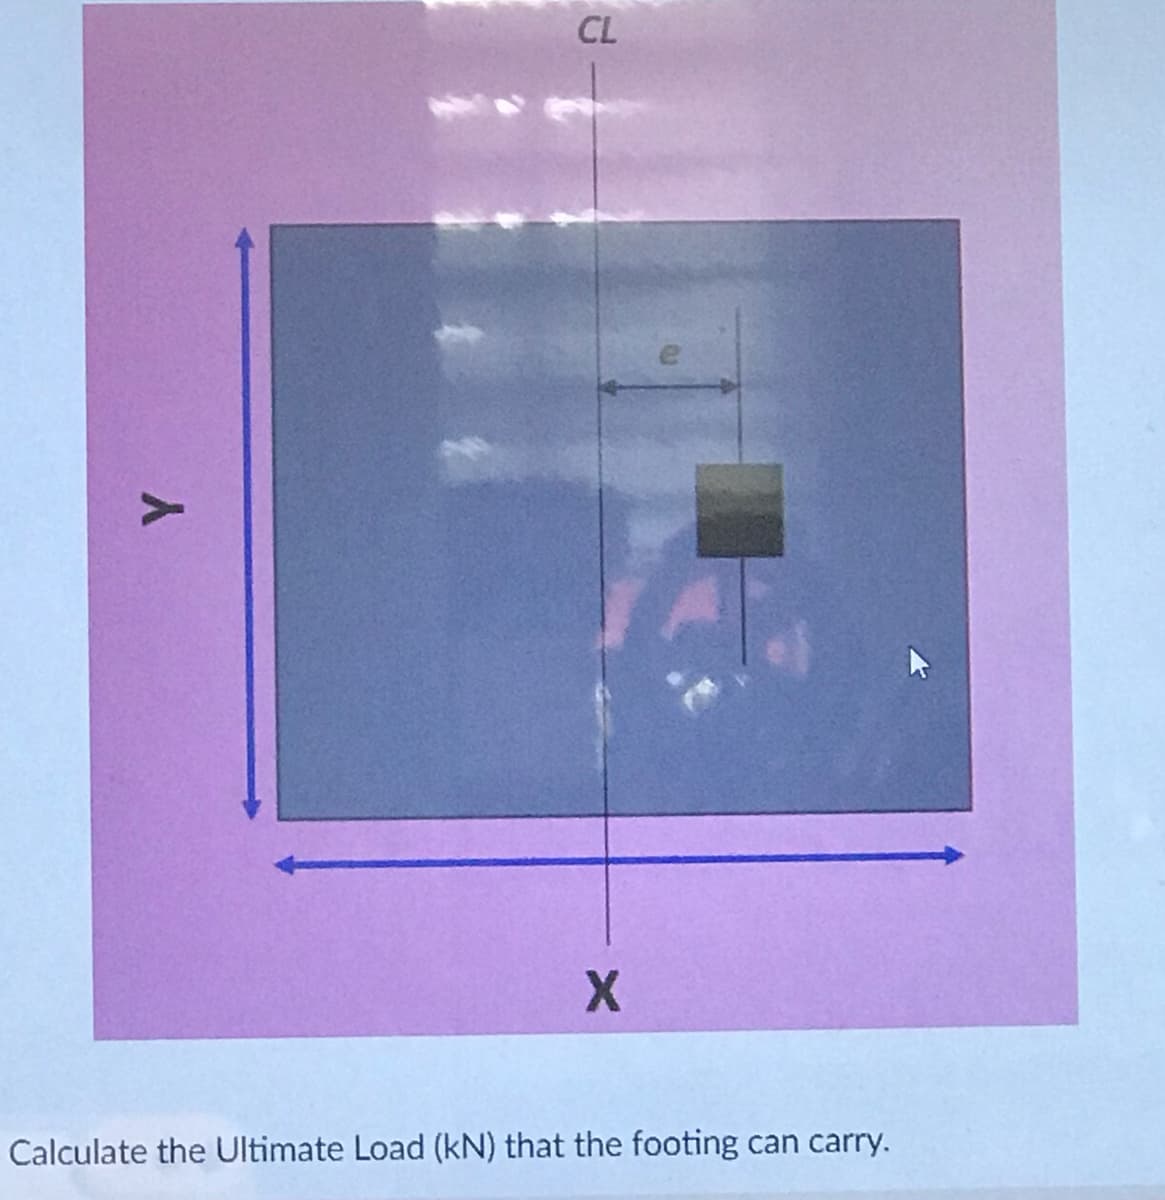 CL
Calculate the Ultimate Load (kN) that the footing can carry.
